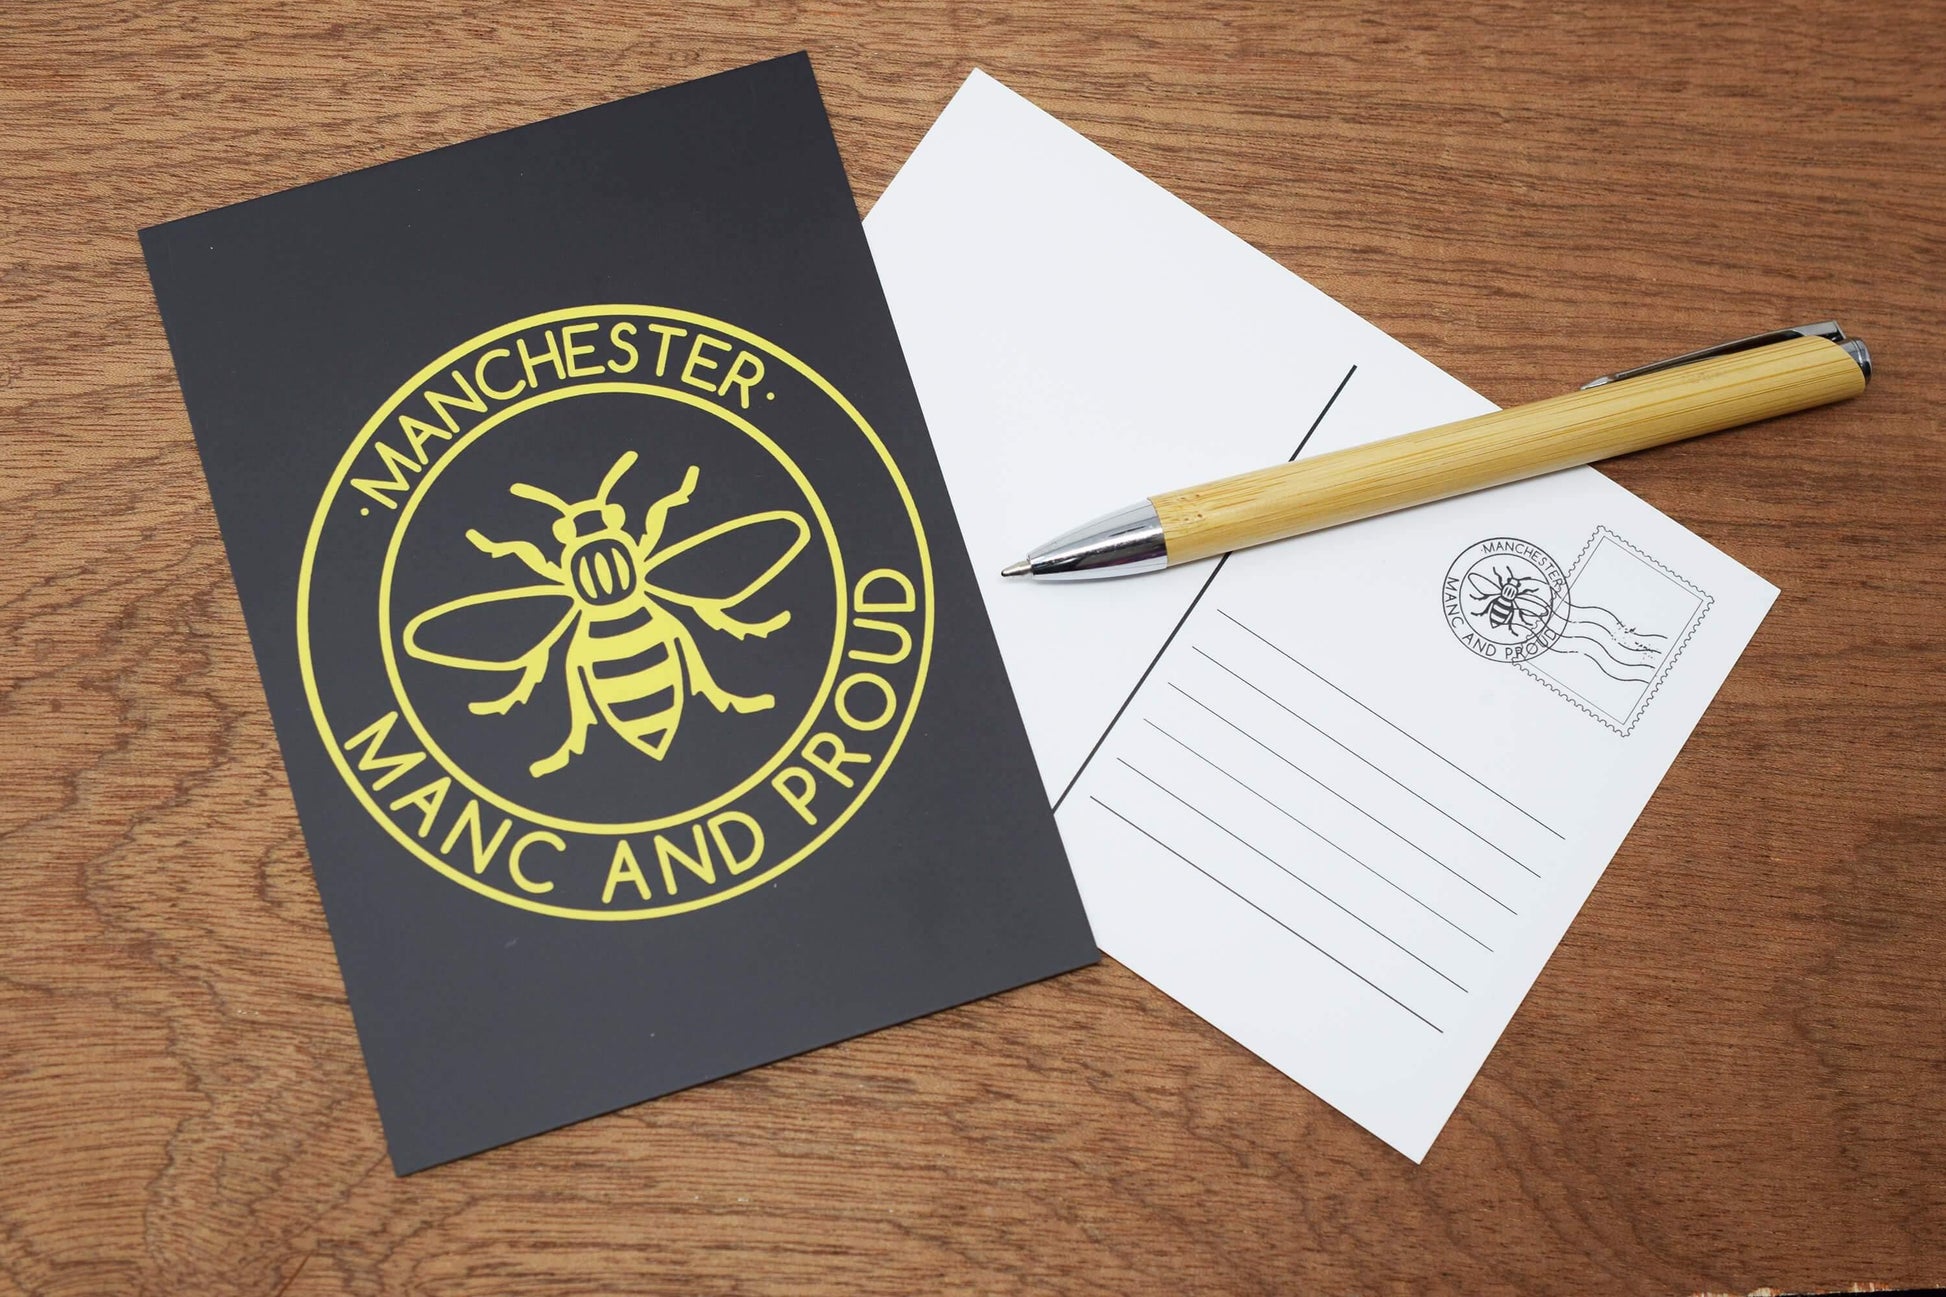 Pack of 3 Manchester Postcards - Choose Your Designs! - The Manchester Shop